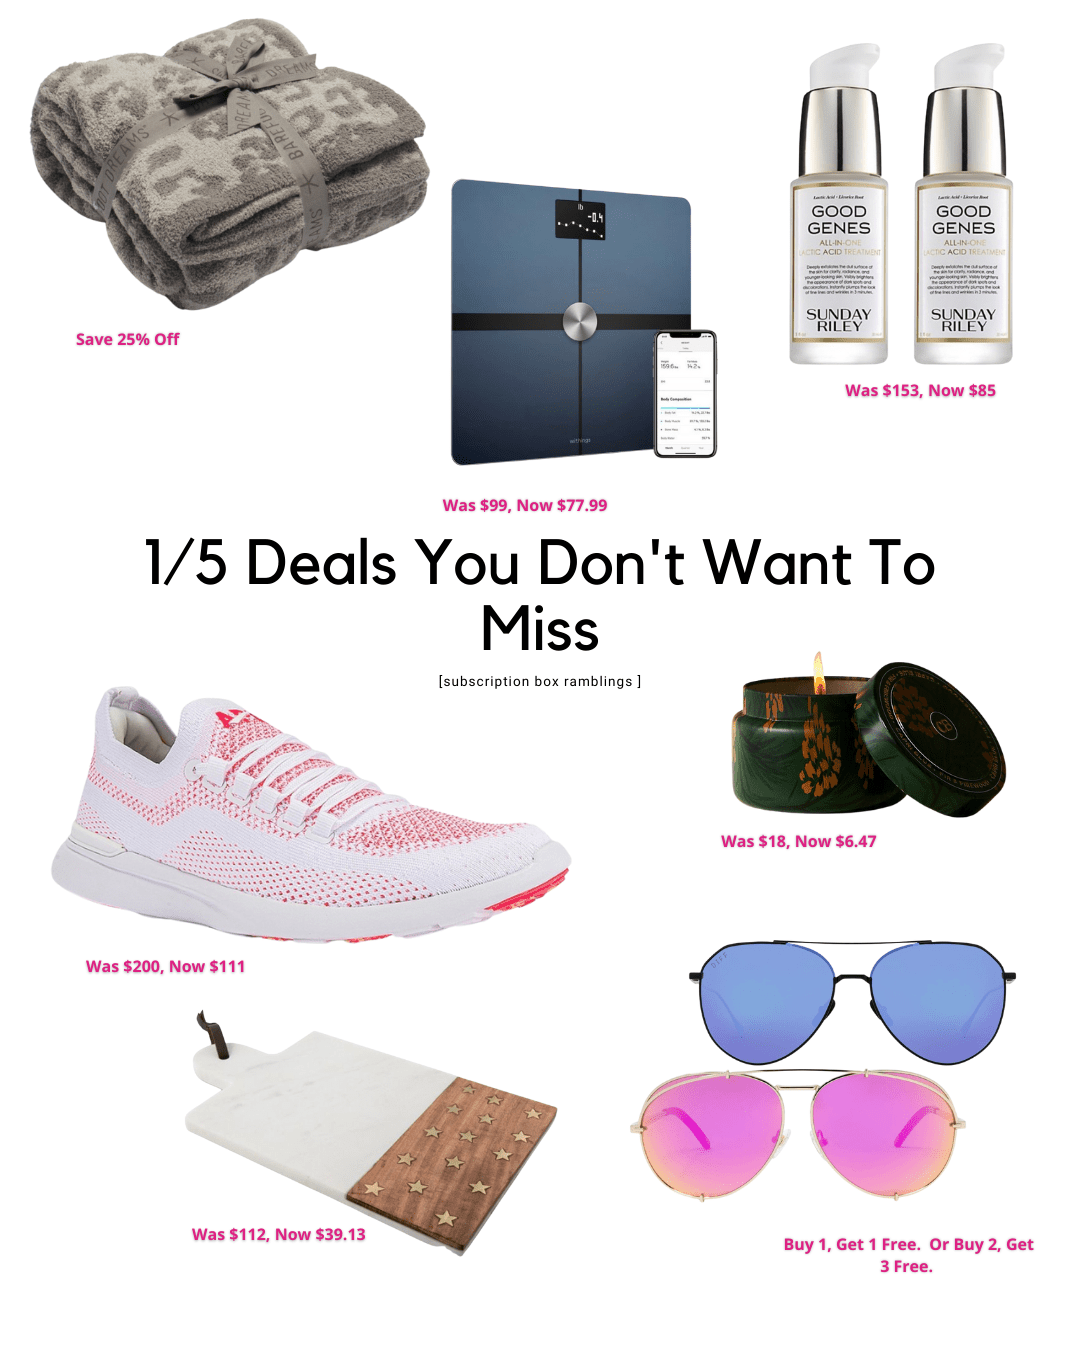 Deals You Don’t Want to Miss – 1/5